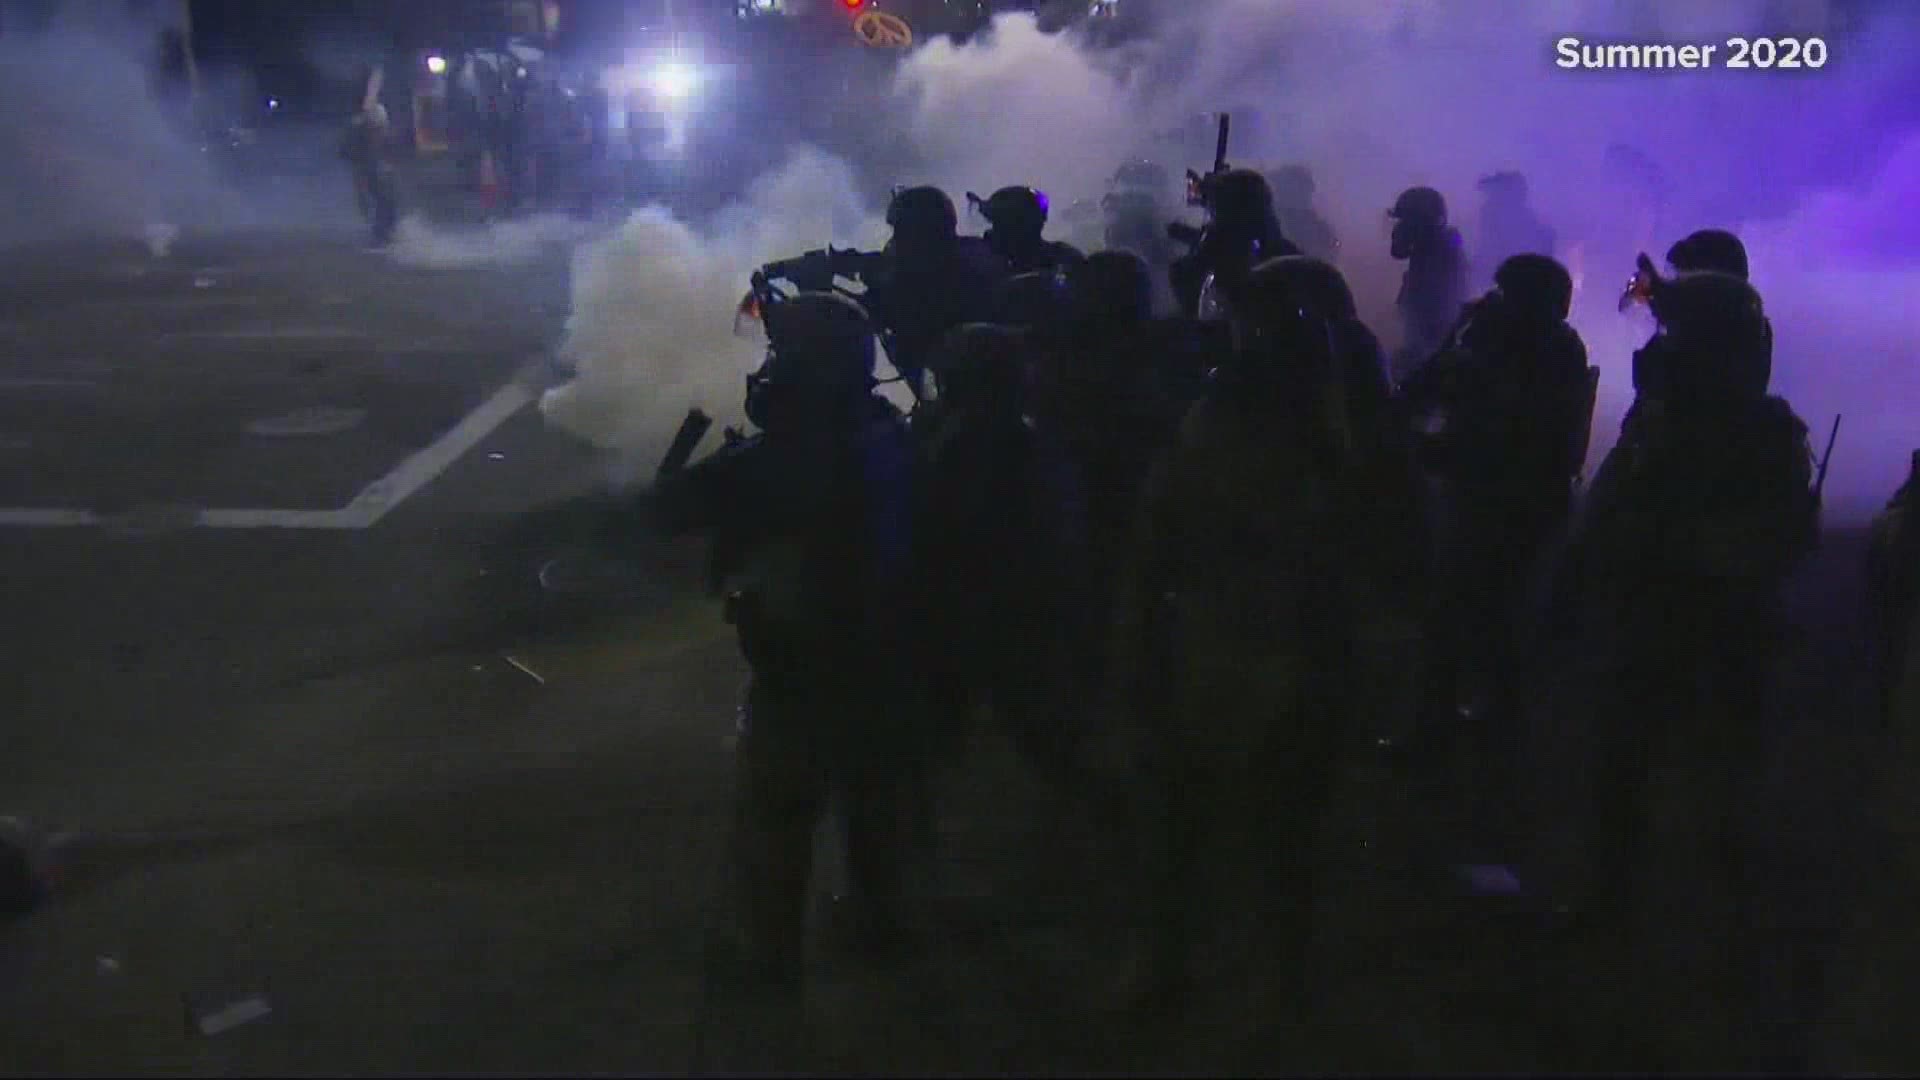 Severe headaches, fatigue, menstrual changes. Just some of the issues reported by people exposed to tear gas during Portland’s nightly protests and riots.